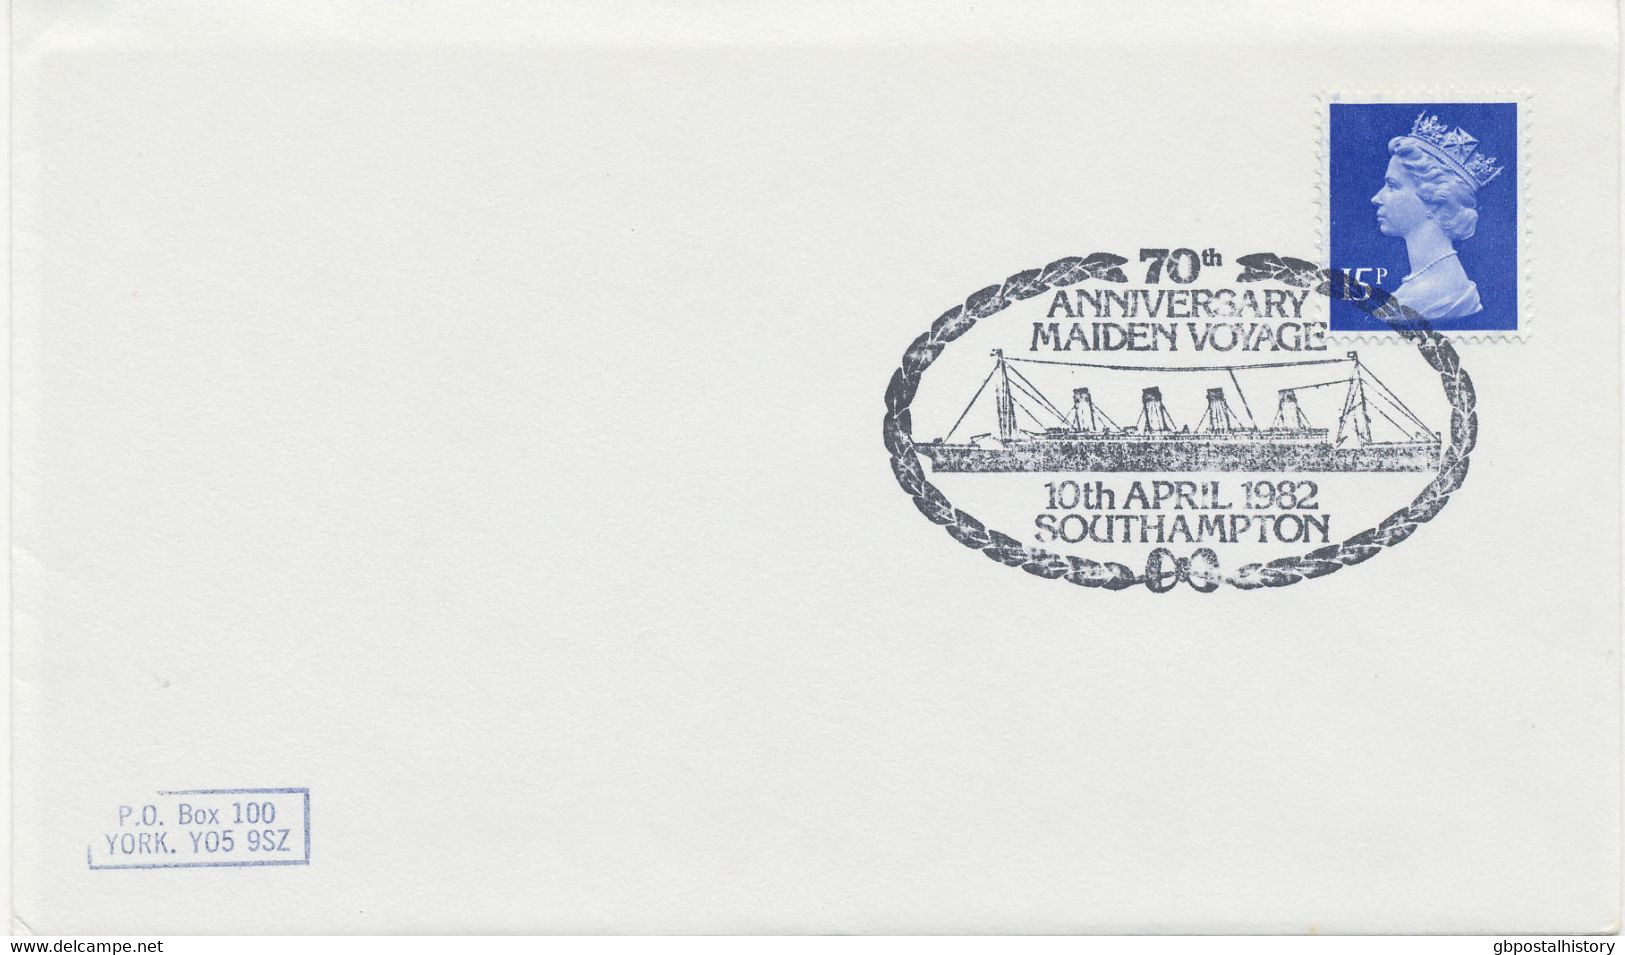 GB SPECIAL EVENT POSTMARKS 70th ANNIVERSARY MAIDEN VOYAGE 10th APRIL 1982 SOUTHAMPTON (RMS TITANIC) - Postmark Collection